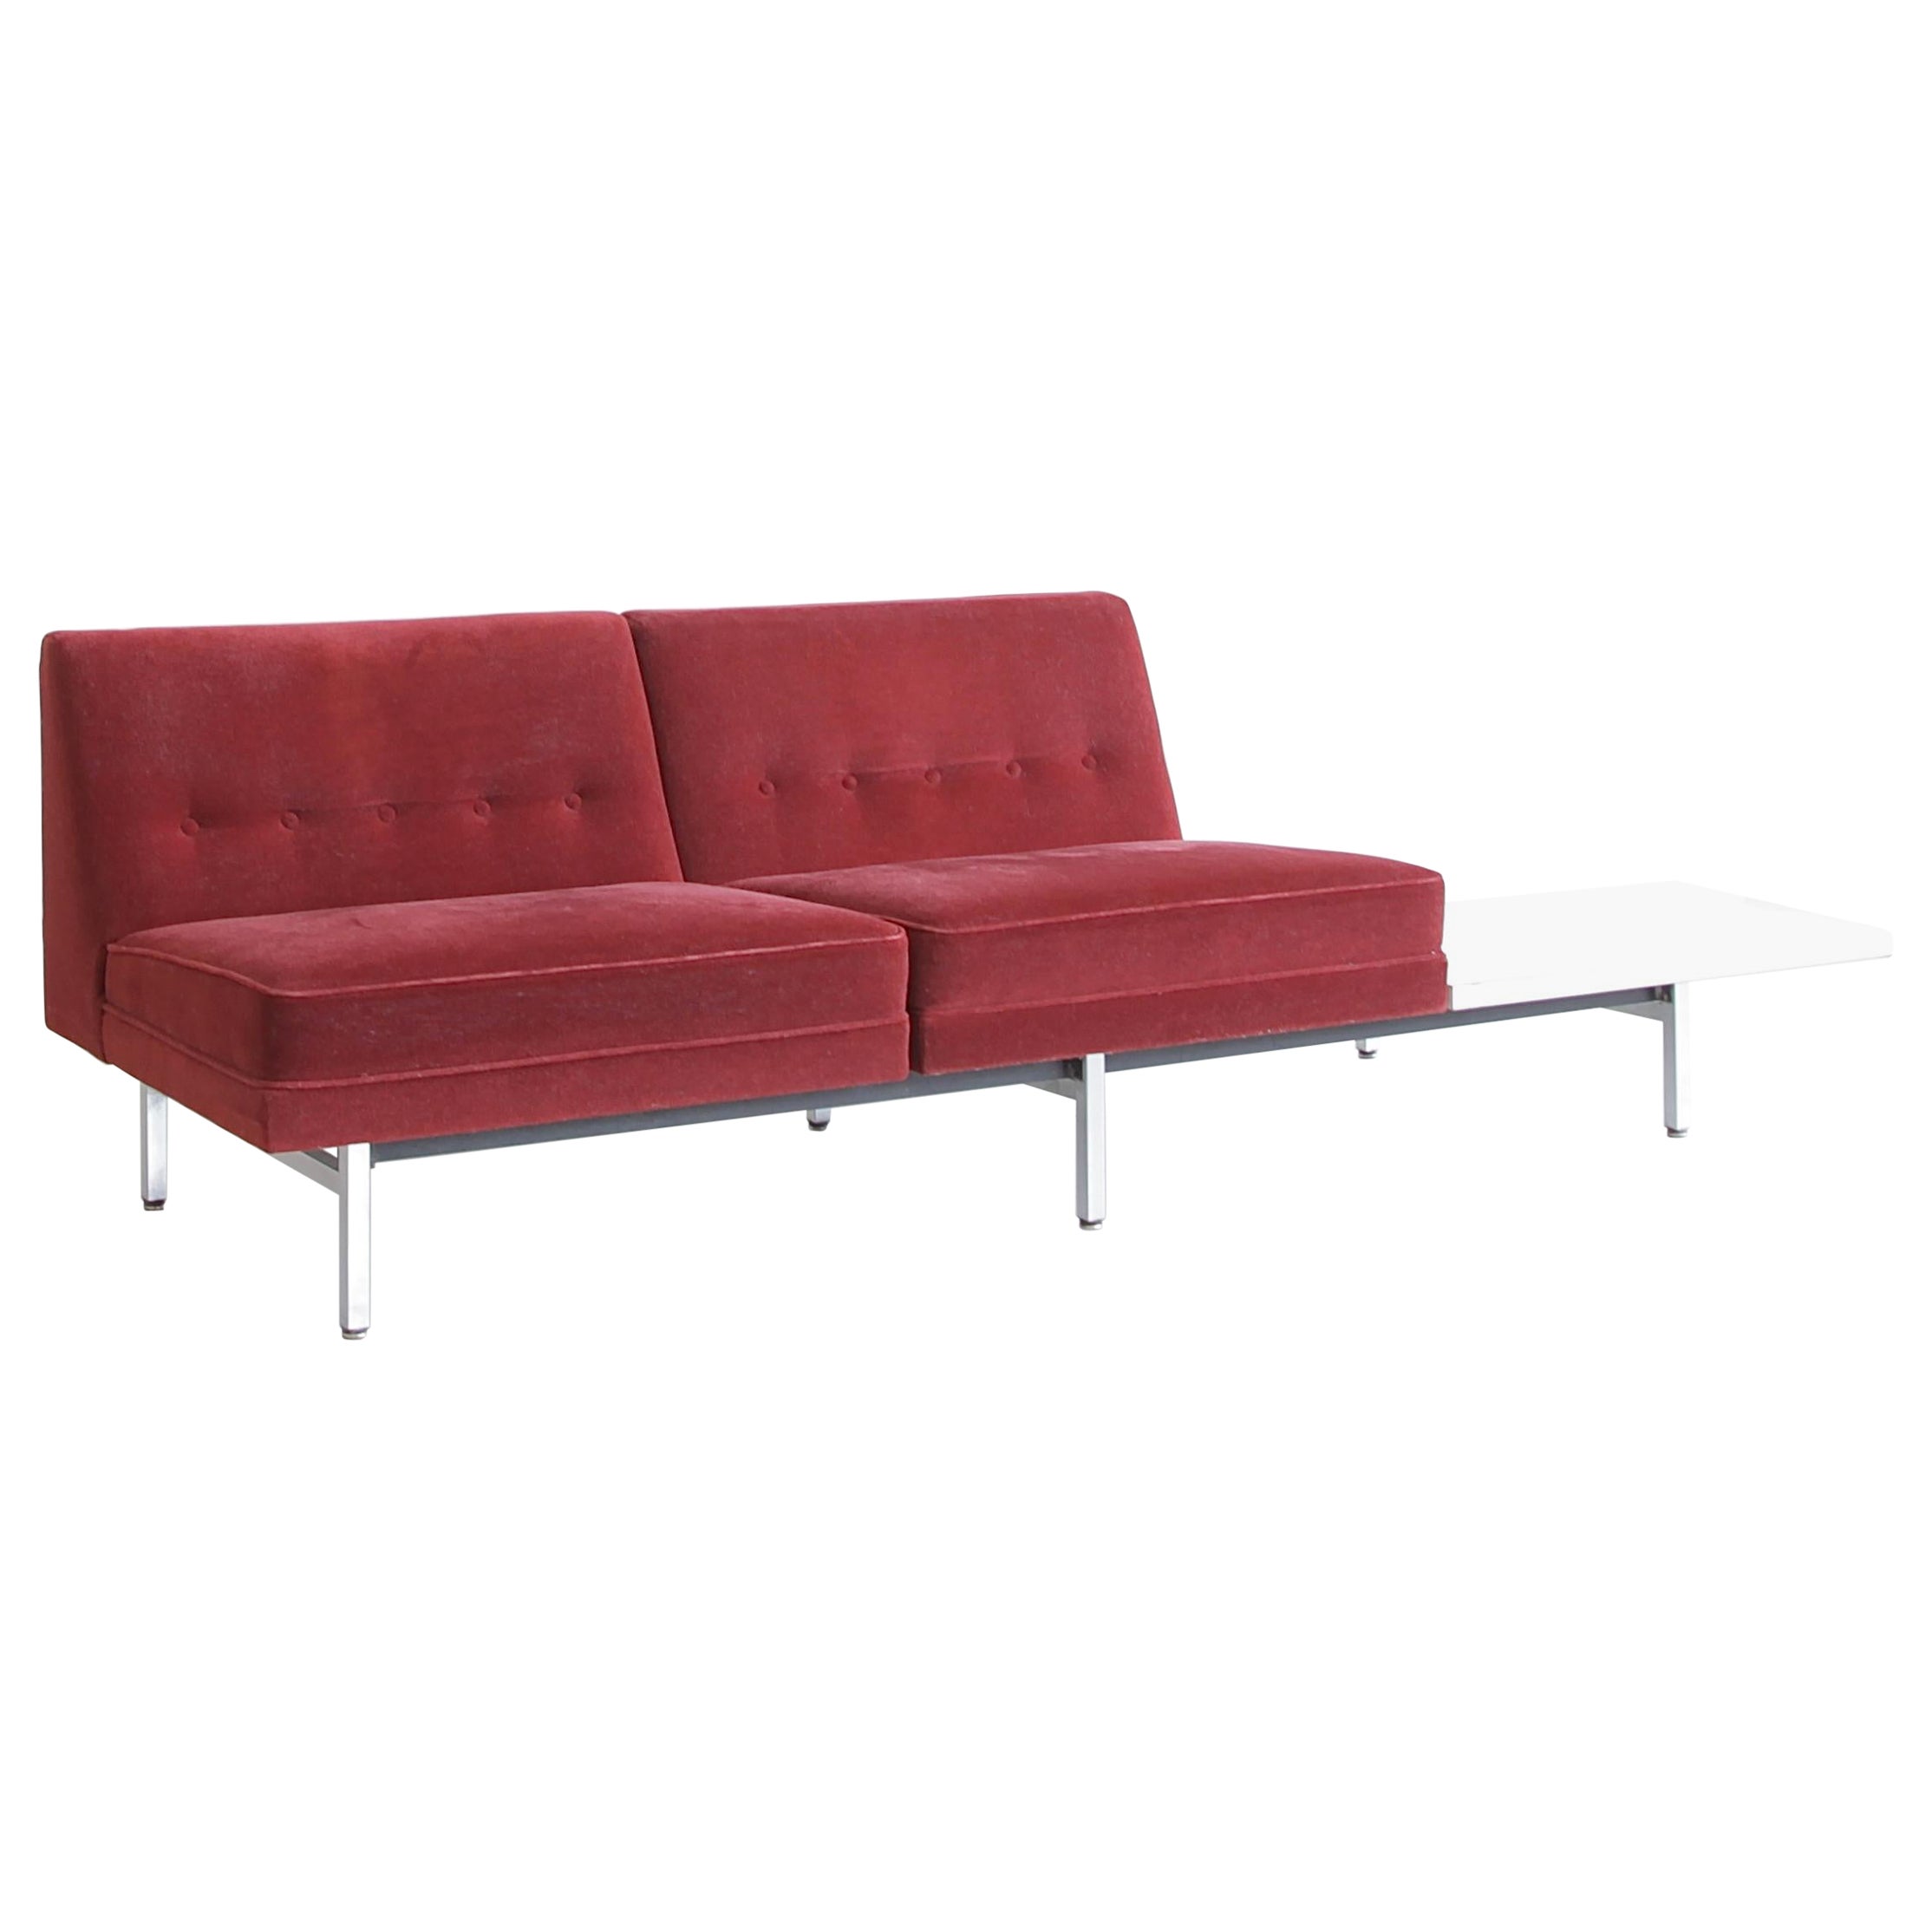 Modular Sofa designed by George NELSON for HERMAN MILLER, 1960s For Sale